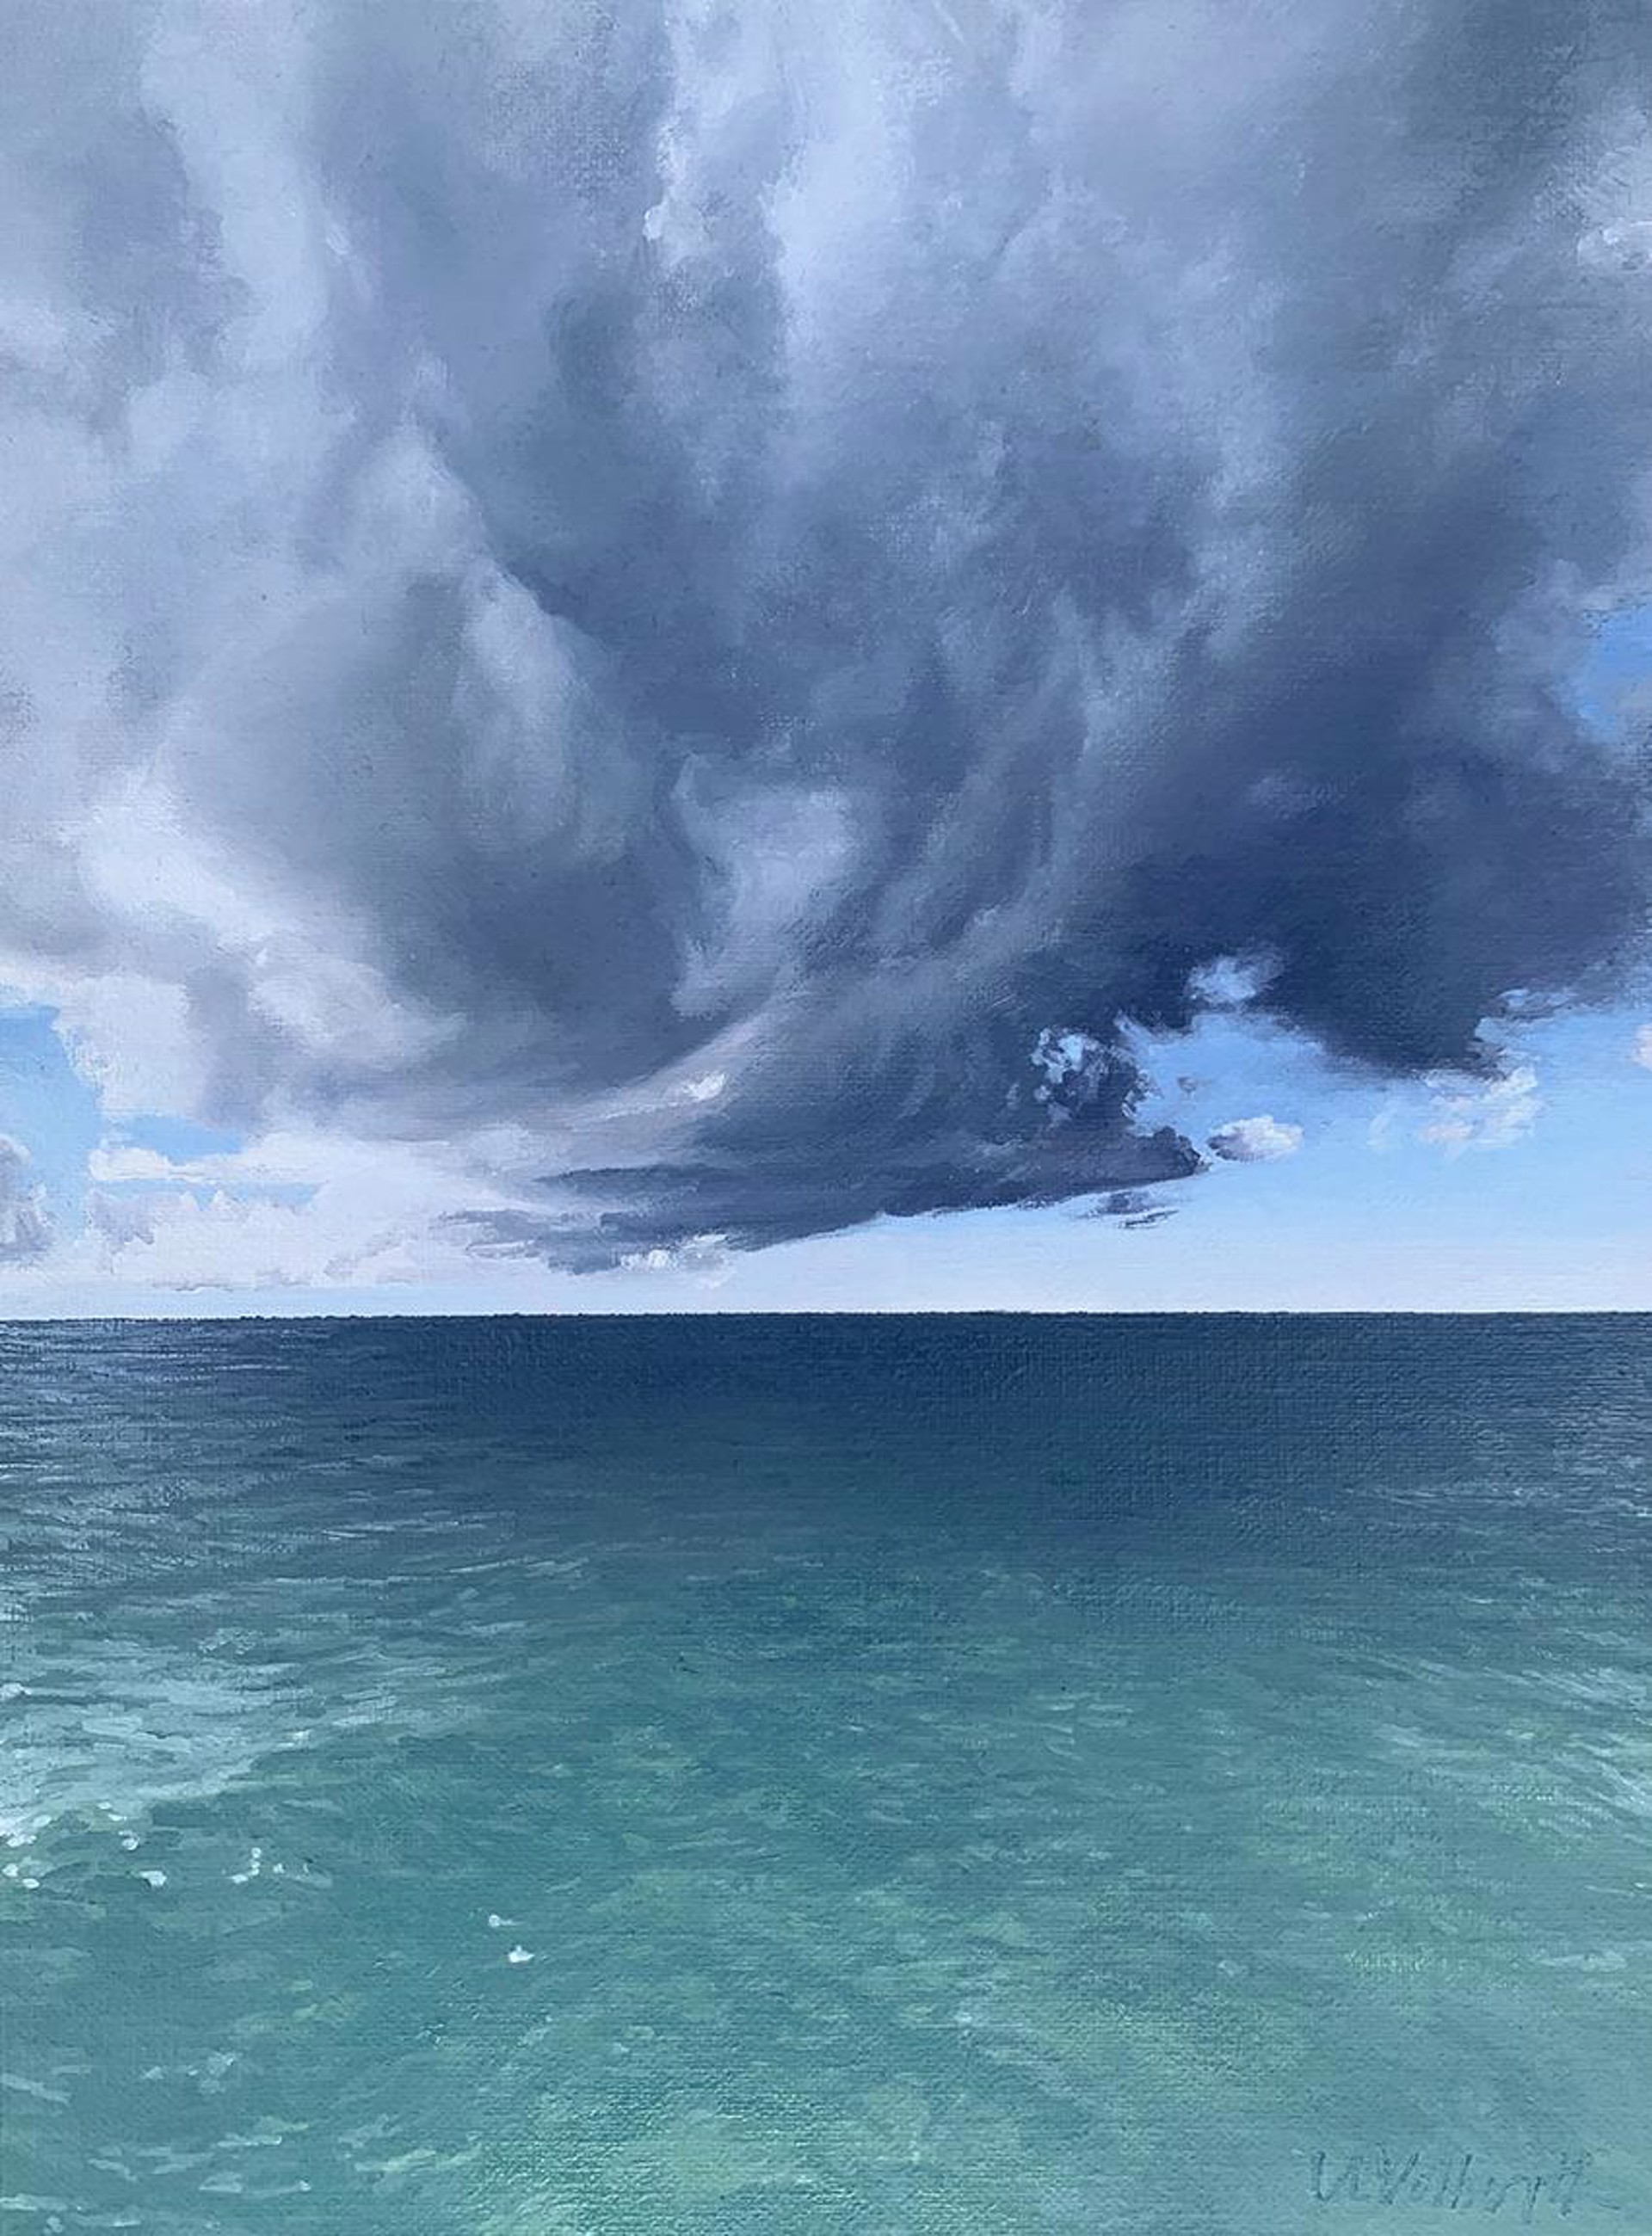 Approaching Storm, Key West by Veronica Volborth